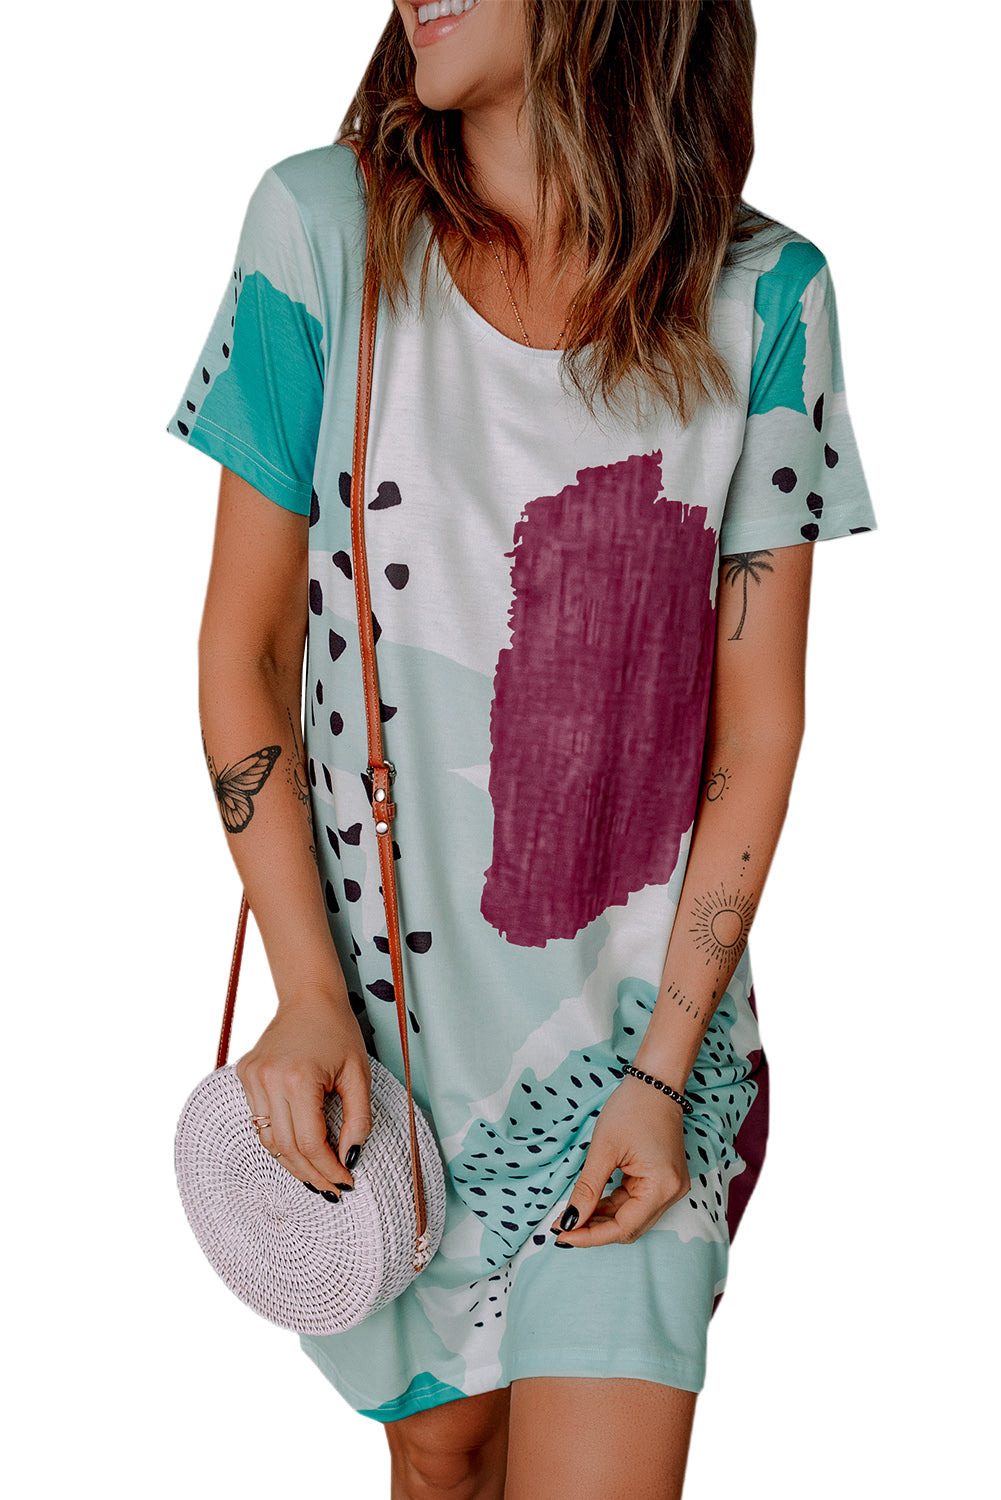 Tie Dye and Spotted Print Color Block Casual T Shirt Summer Dress